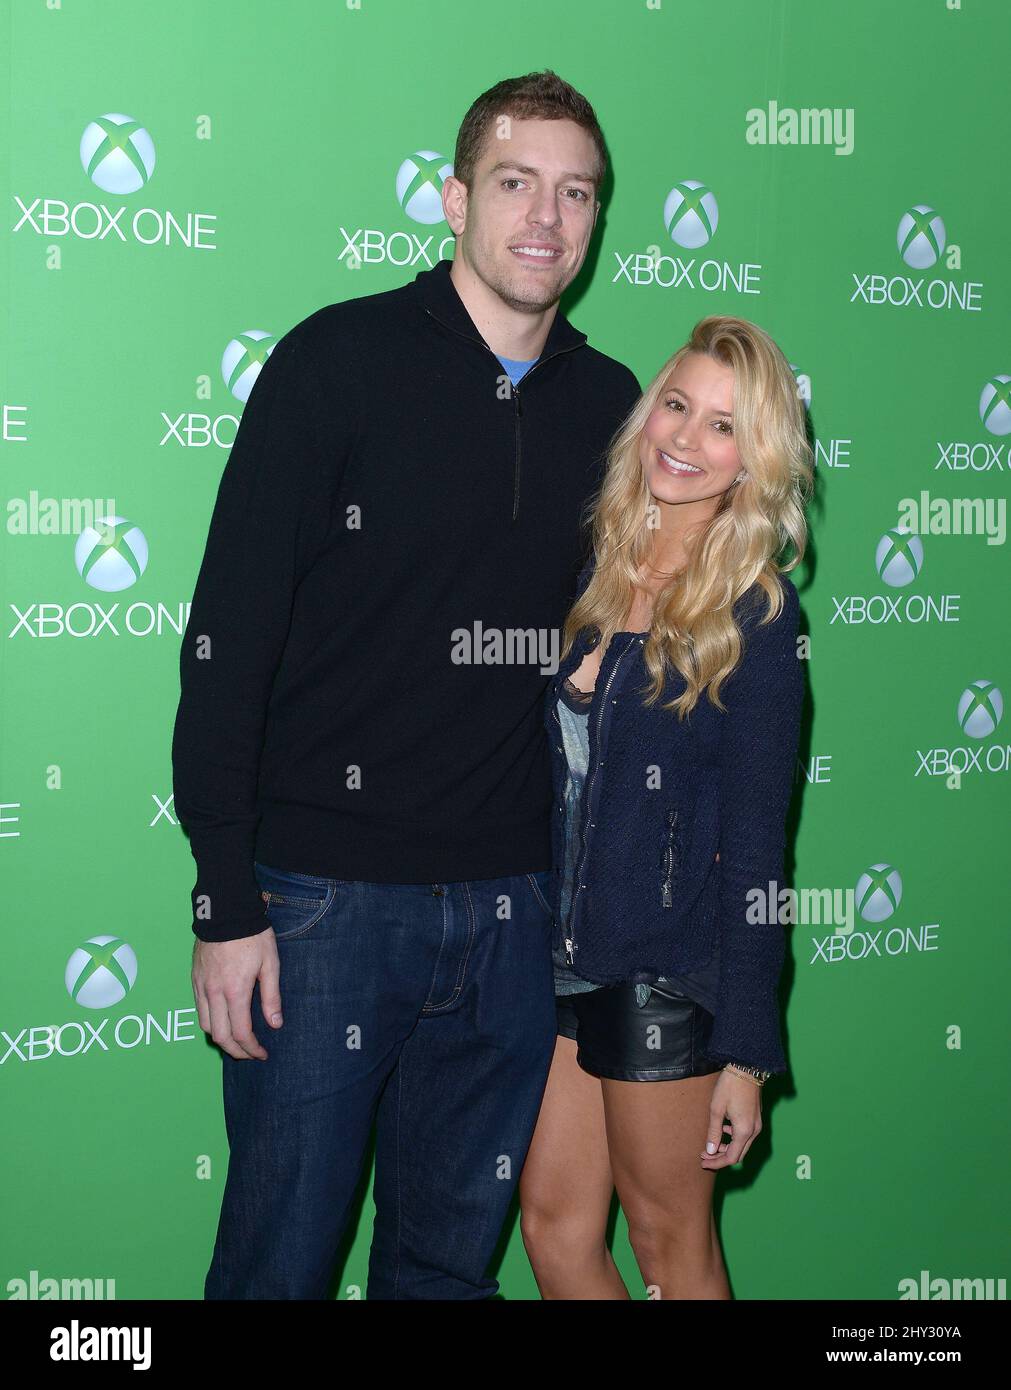 David Lee, Sabina Gadecki attending the Xbox One Official Launch Celebration Held at Milk Studios in Los Angeles, USA. Stock Photo